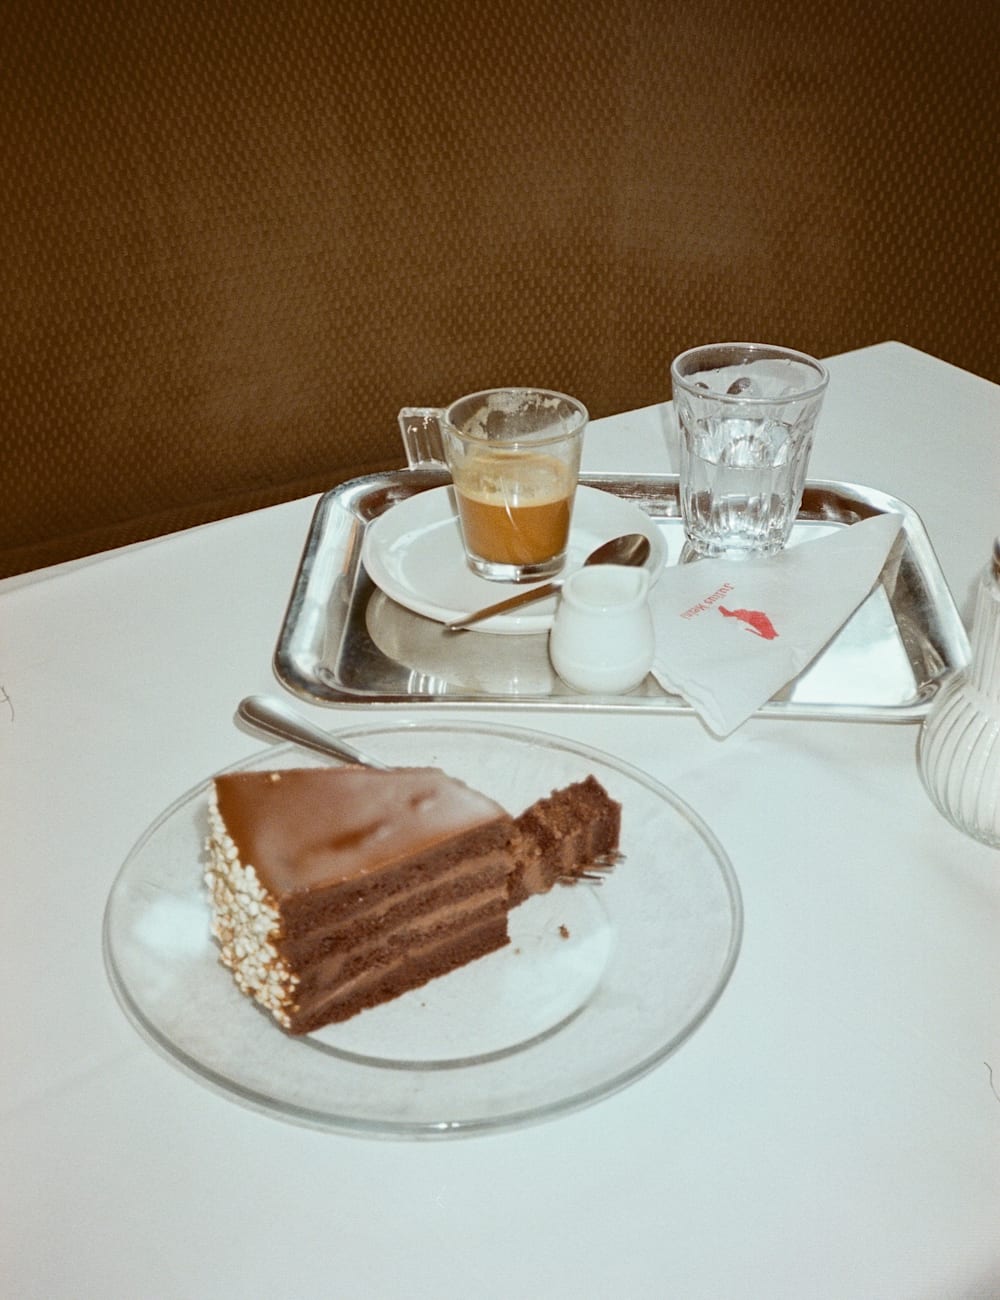 Slice of cake and coffee at coffee shop in Vienna, Austria